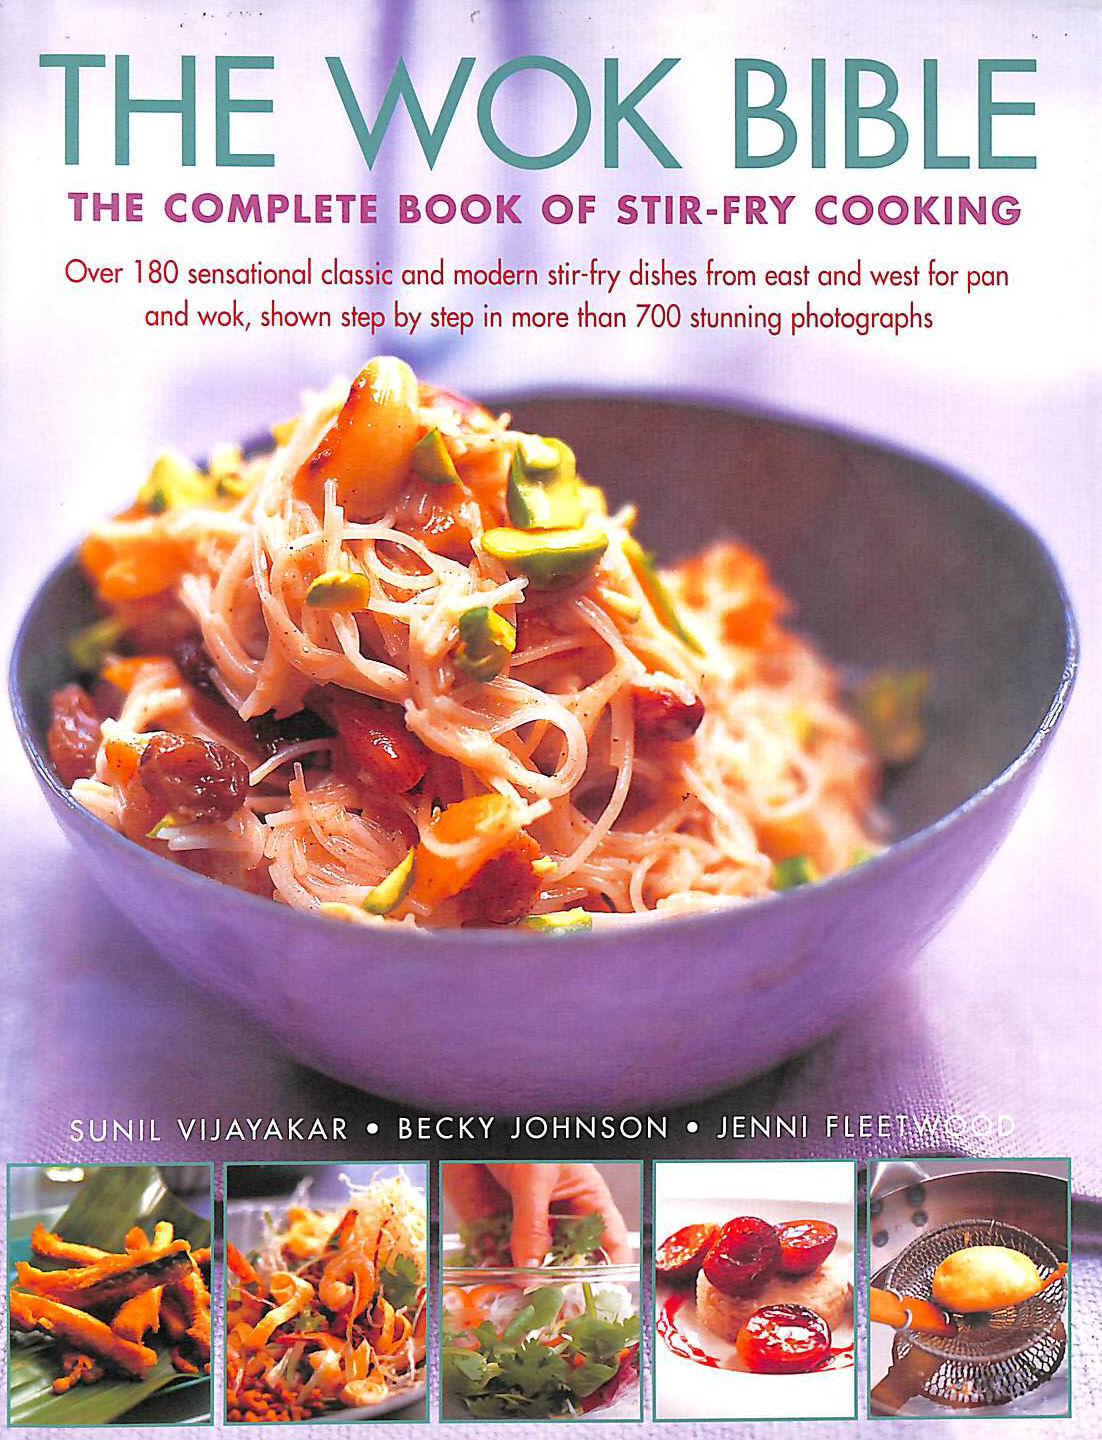  - The Wok Bible: The Complete Book of Stir-Fry Cooking